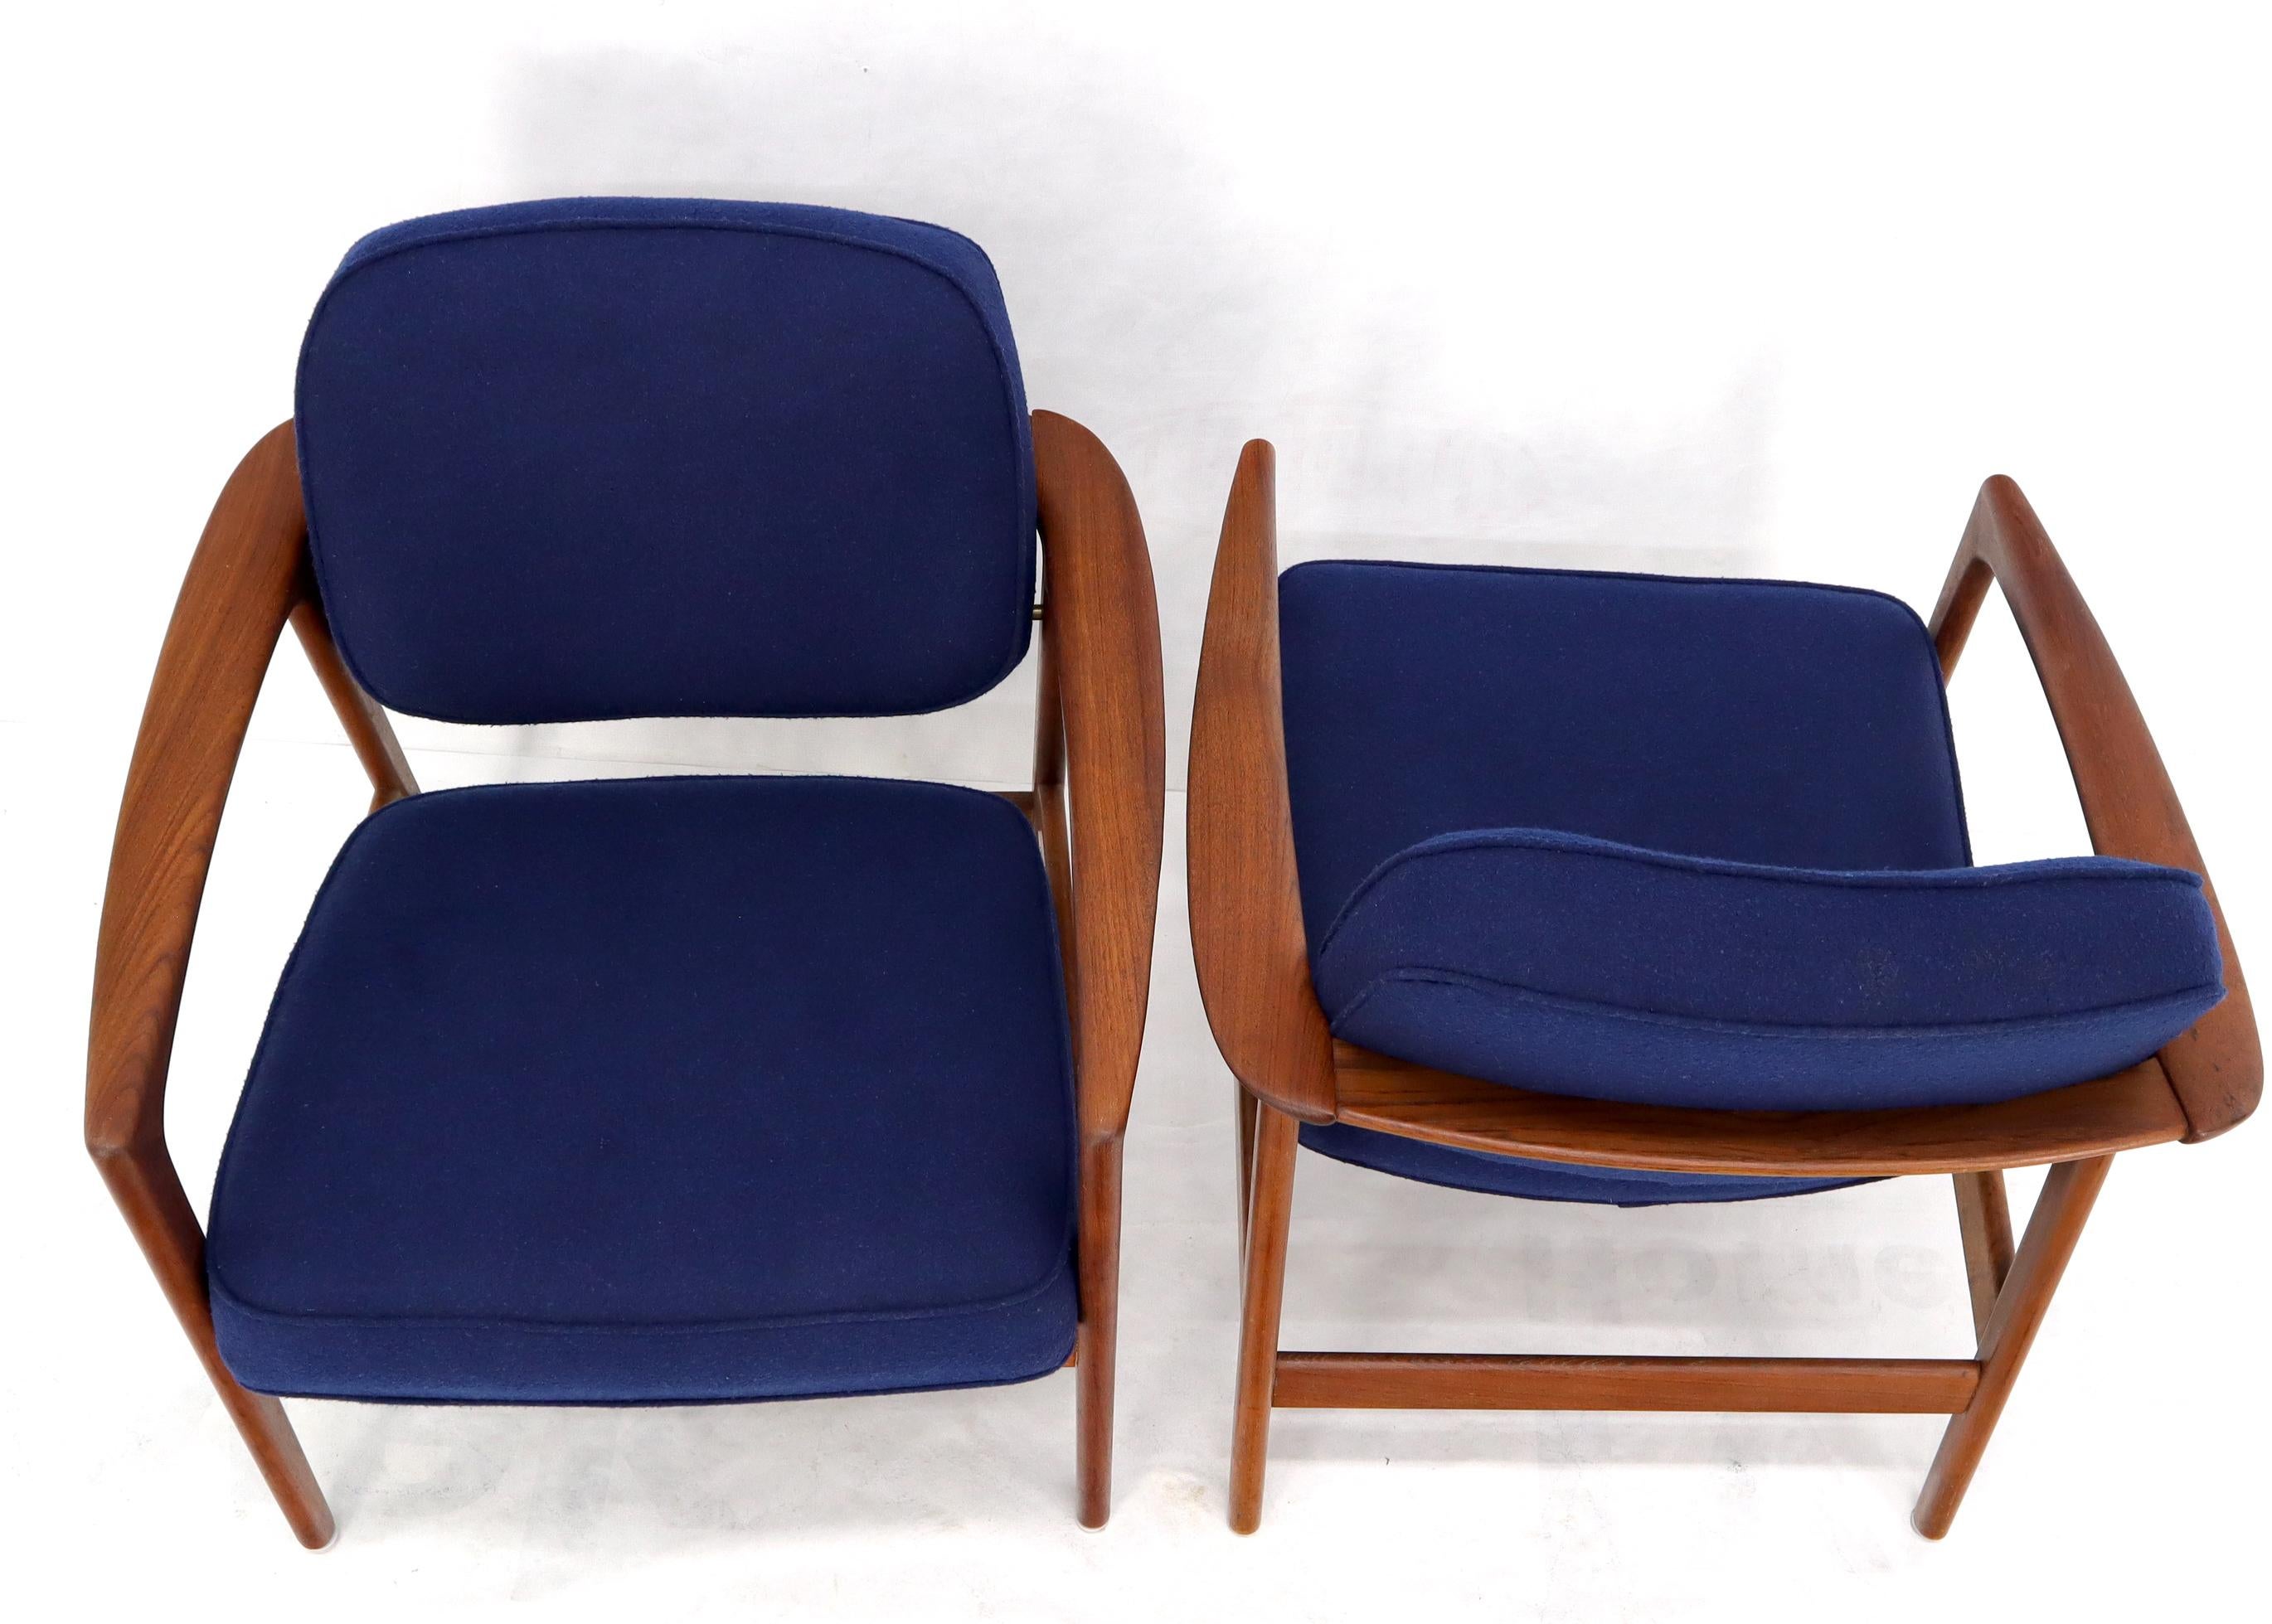 Pair of New Blue Upholstery Teak Danish Mid-Century Modern Arm Lounge Chairs For Sale 2